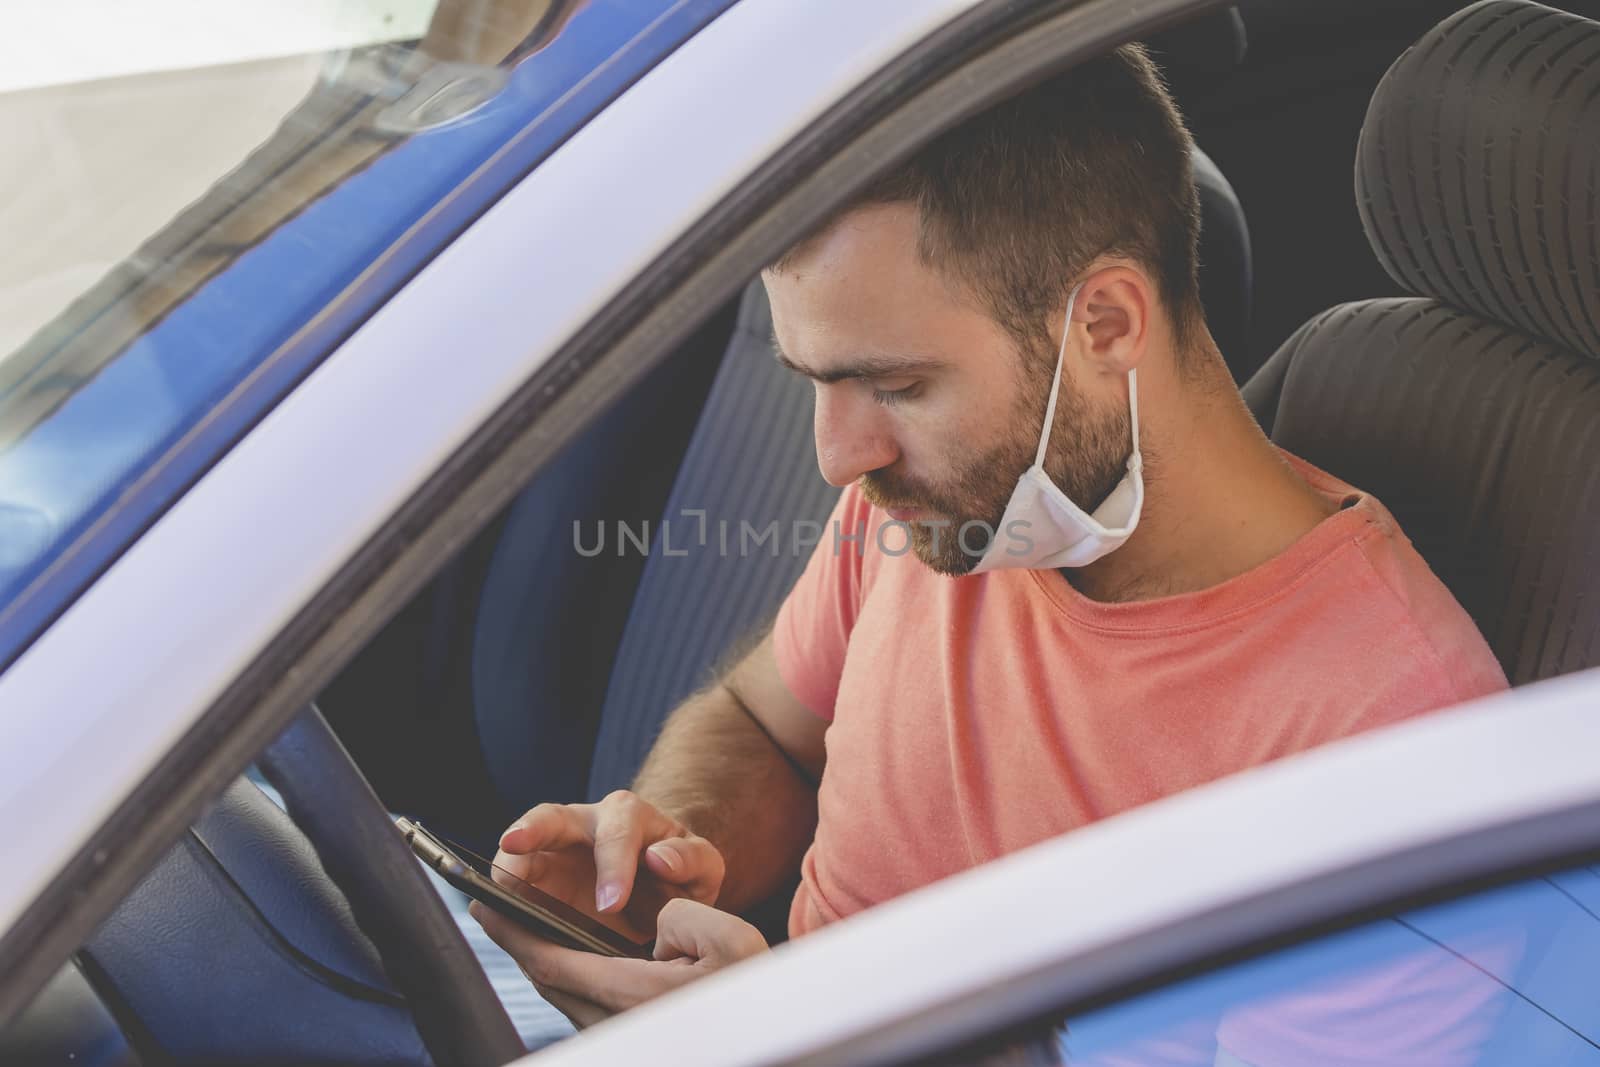 A young man, wearing a cloth face mask, checks the mobile phone inside the car, while he waits for someone before drive, in the province of Zaragoza, Spain.